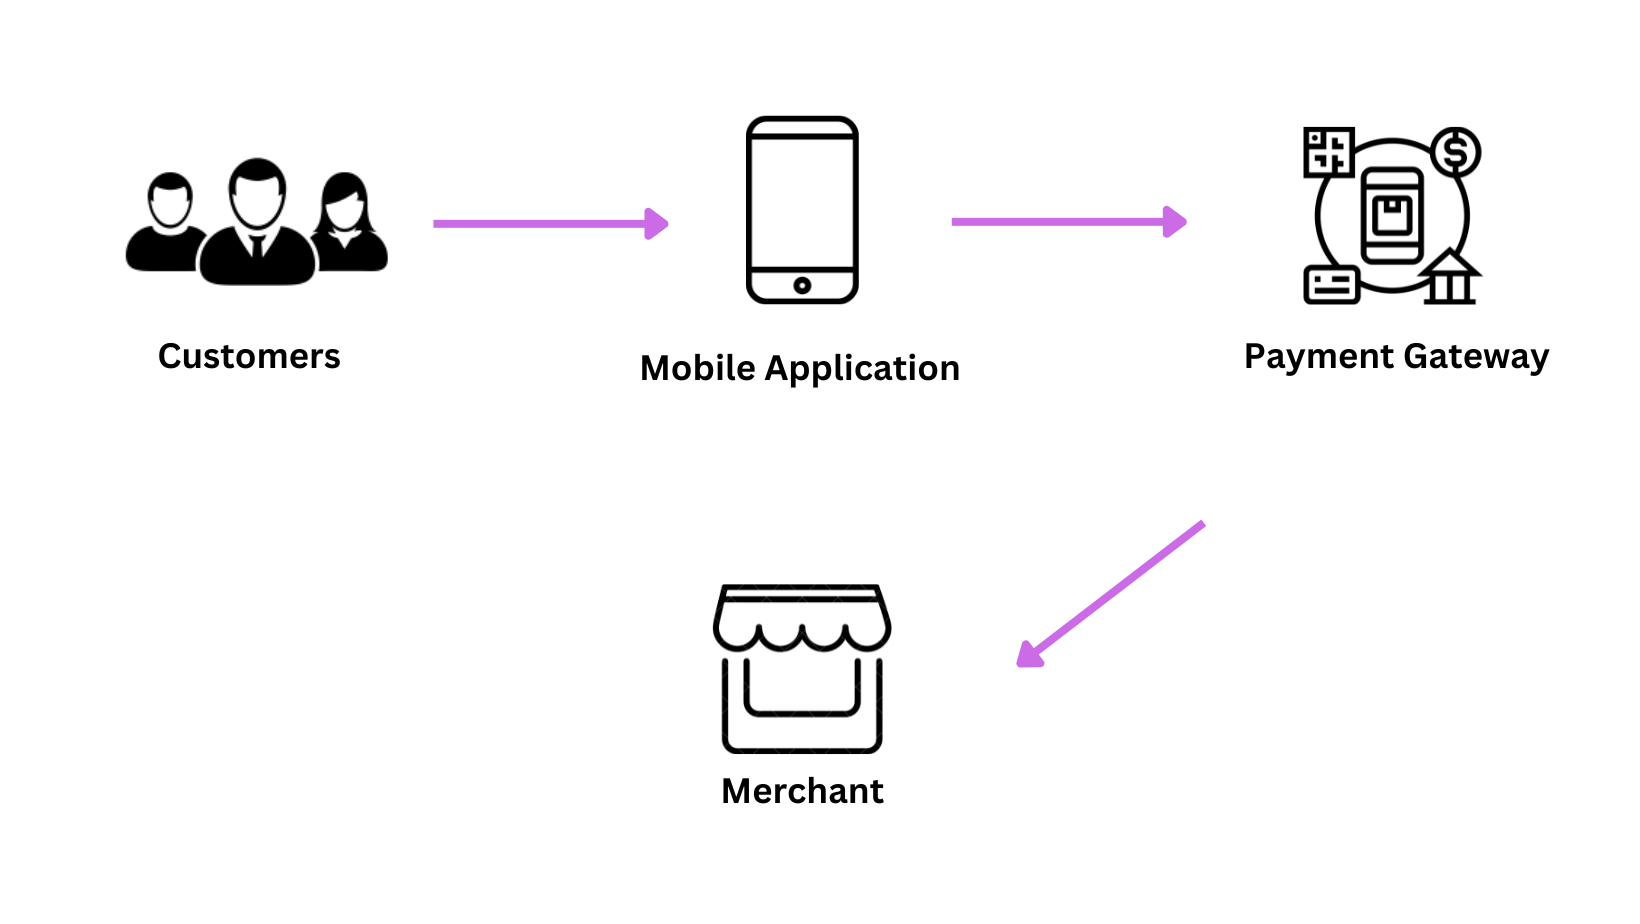 Mobile Payment works